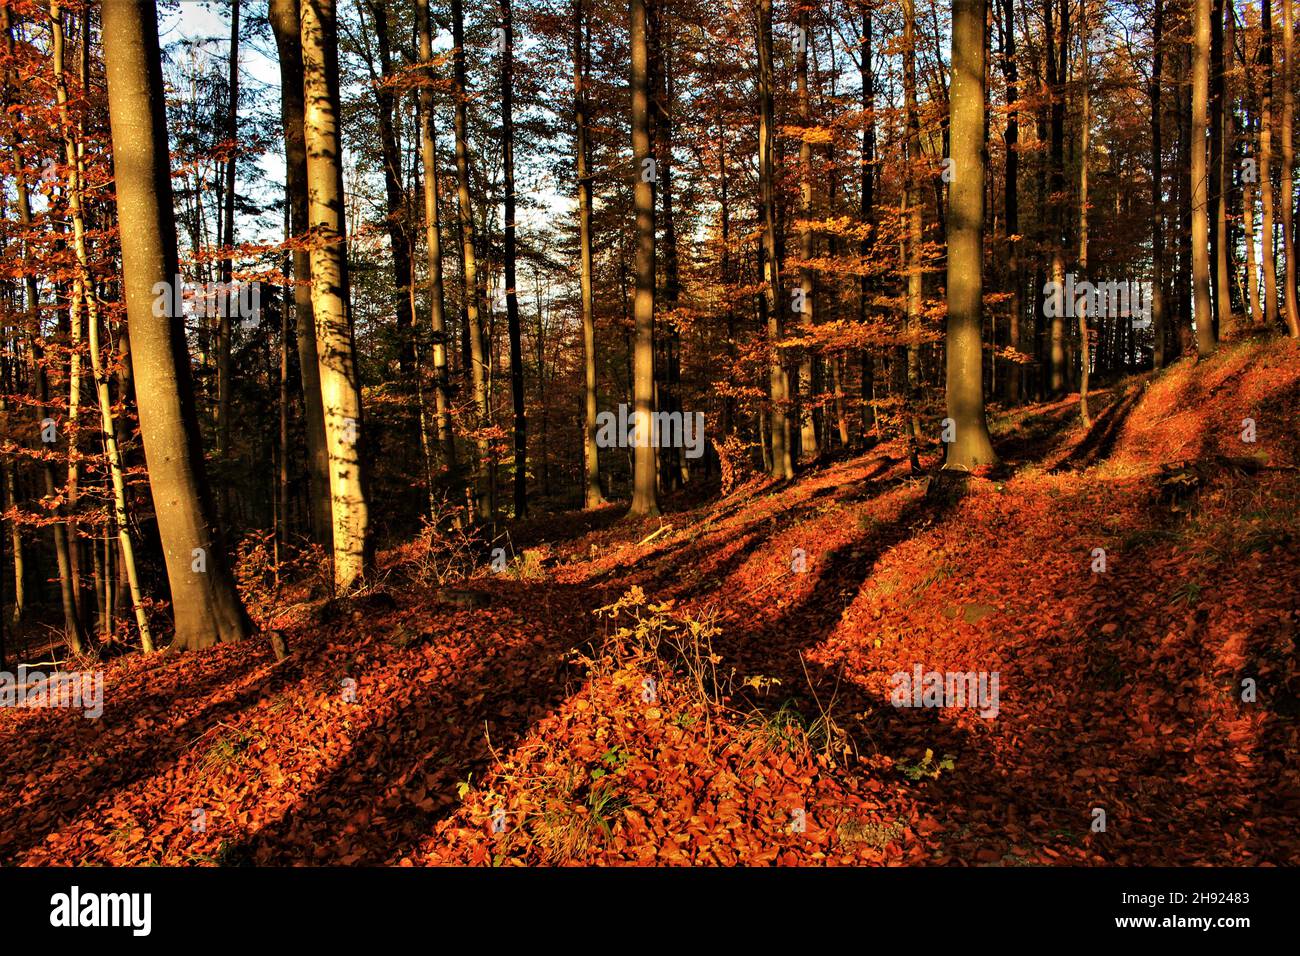 Autumnal forest, autumn wood with tree trunks casting long shadows and a red blanket of leaves seen at sunset (Uetliberg, Zurich, Switzerland) Stock Photo